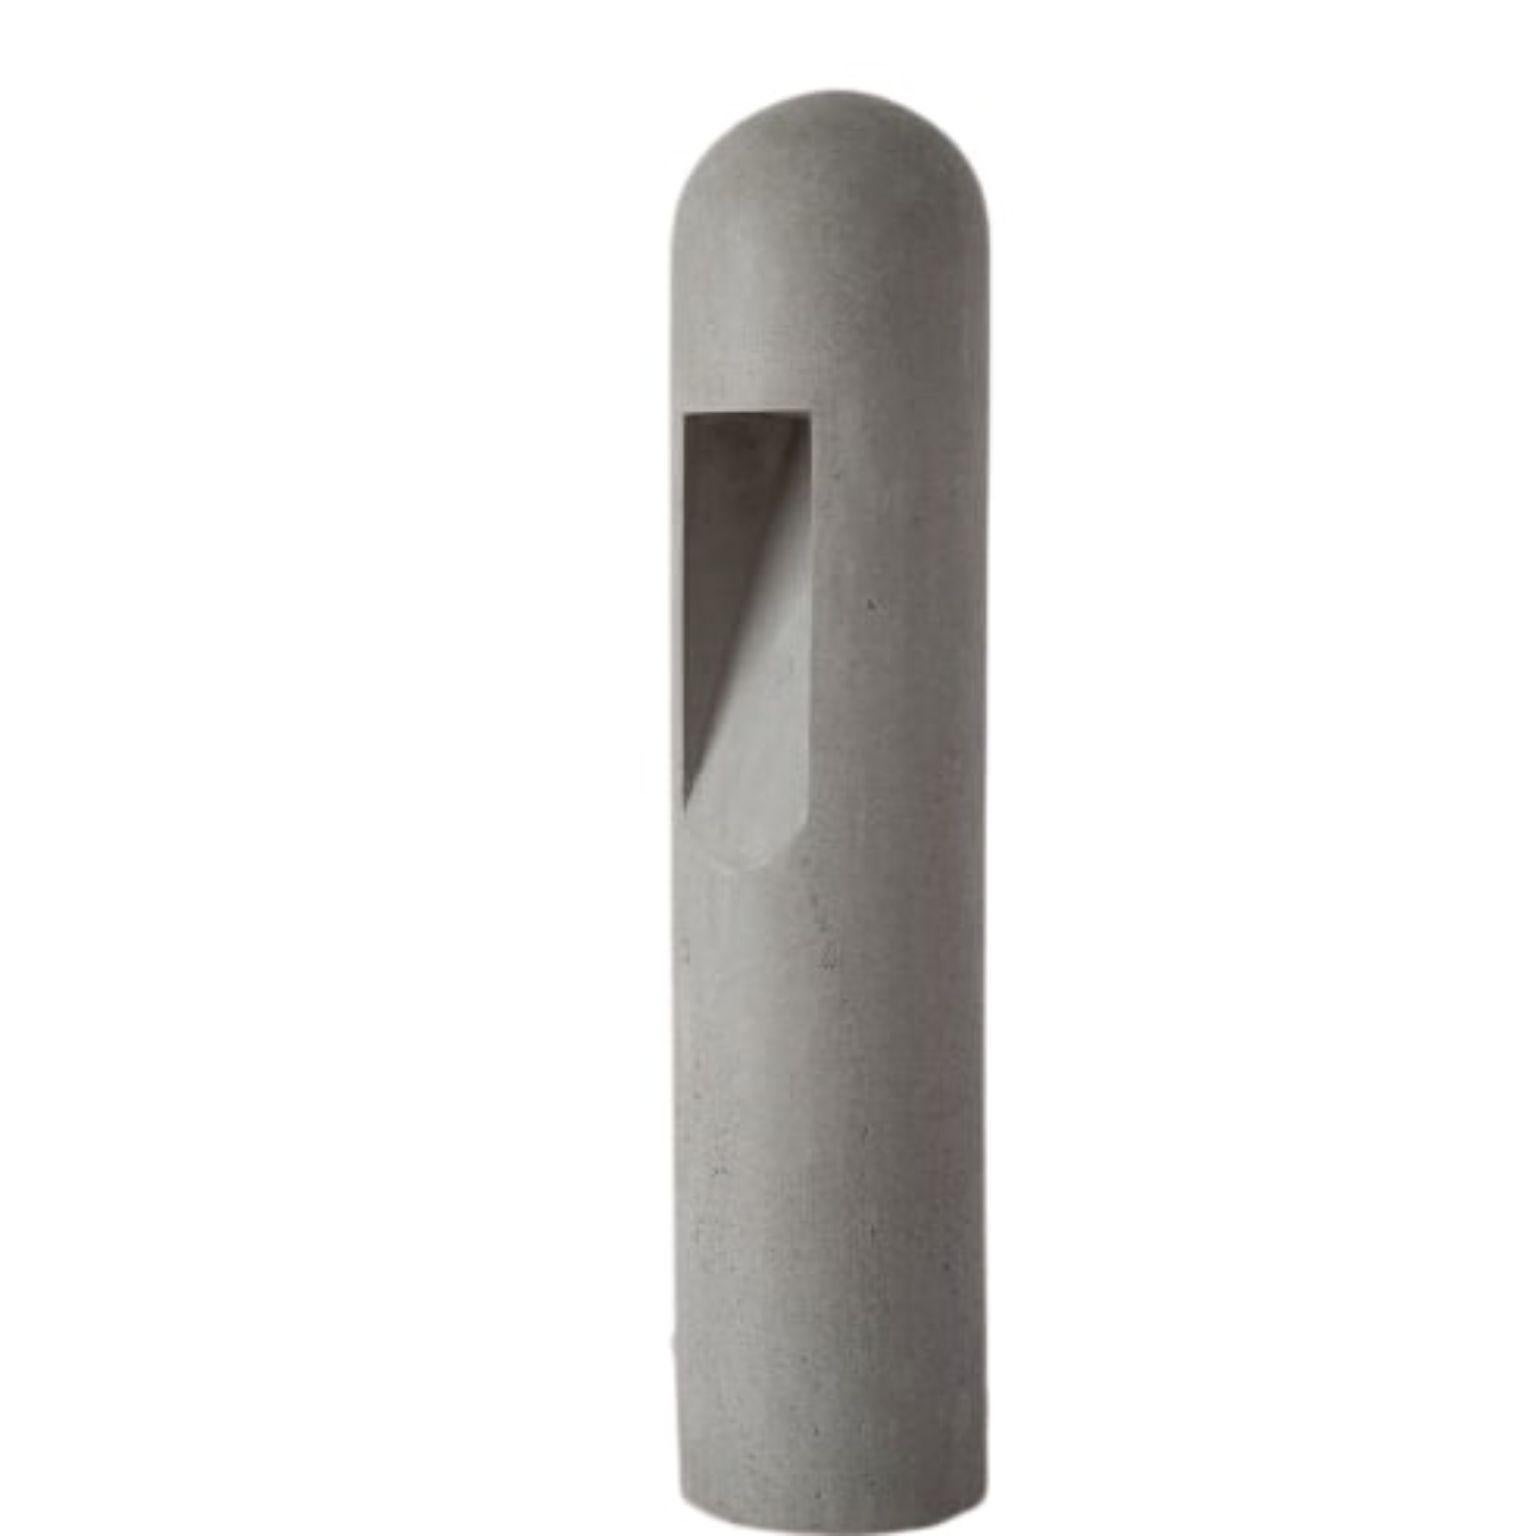 Grey Concrete Lamp by Rick Owens
2013
Dimensions: L 15 x W 15 x H 63 cm
Materials : Grey Concrete
Weight : 19 kg
Note: led 230v

Available in Bronze.

Rick Owens is a California-born fashion and furniture has developed a unique style that